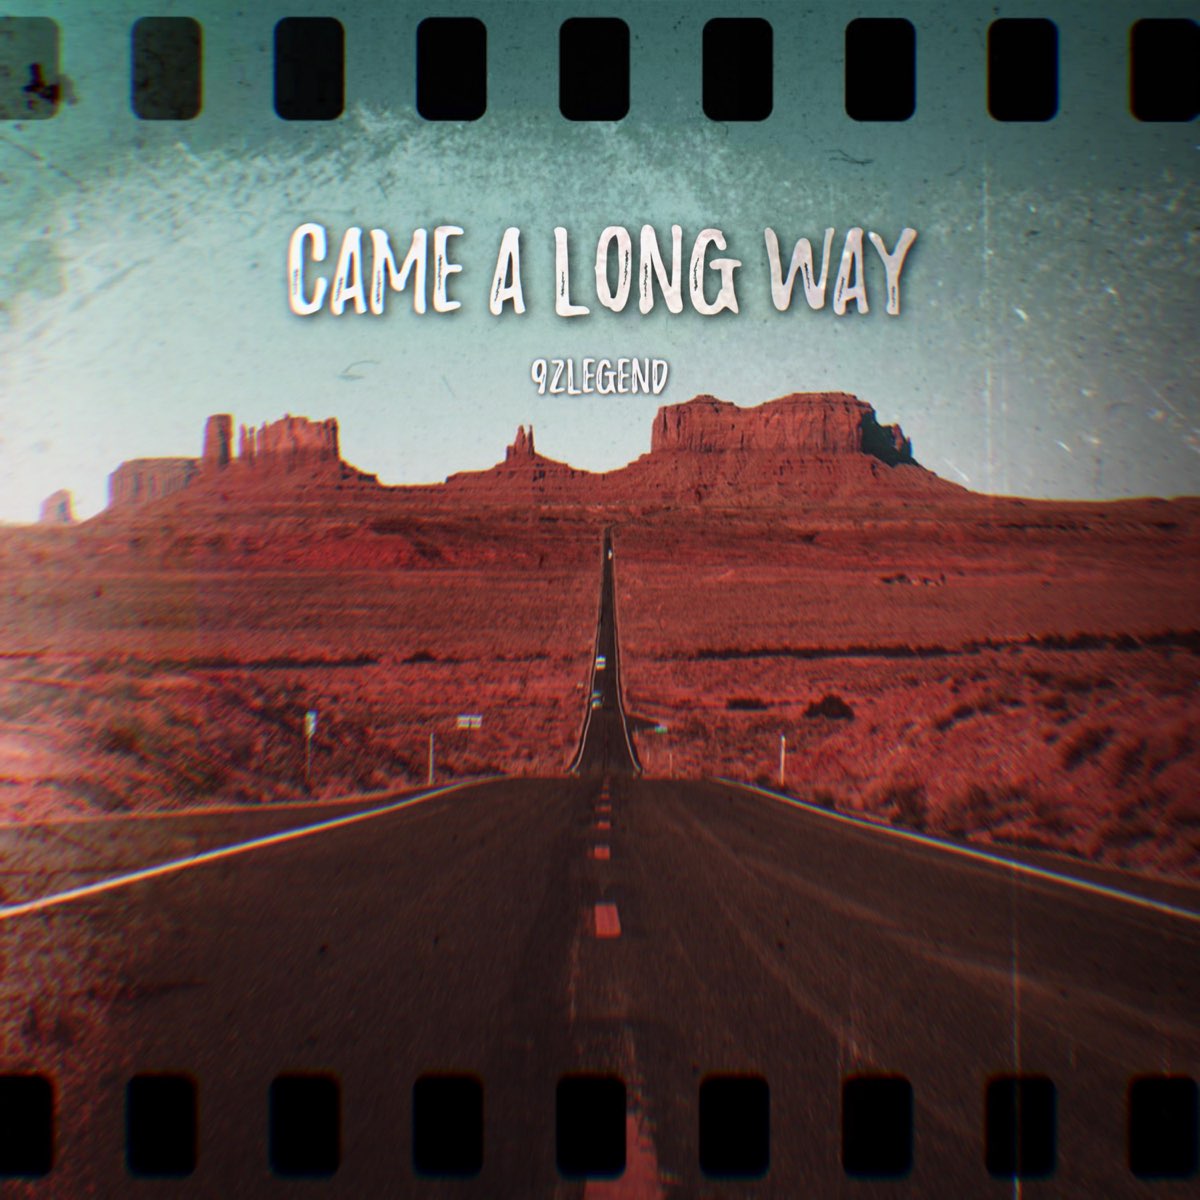 Came a Long Way - Single by 92legend on Apple Music